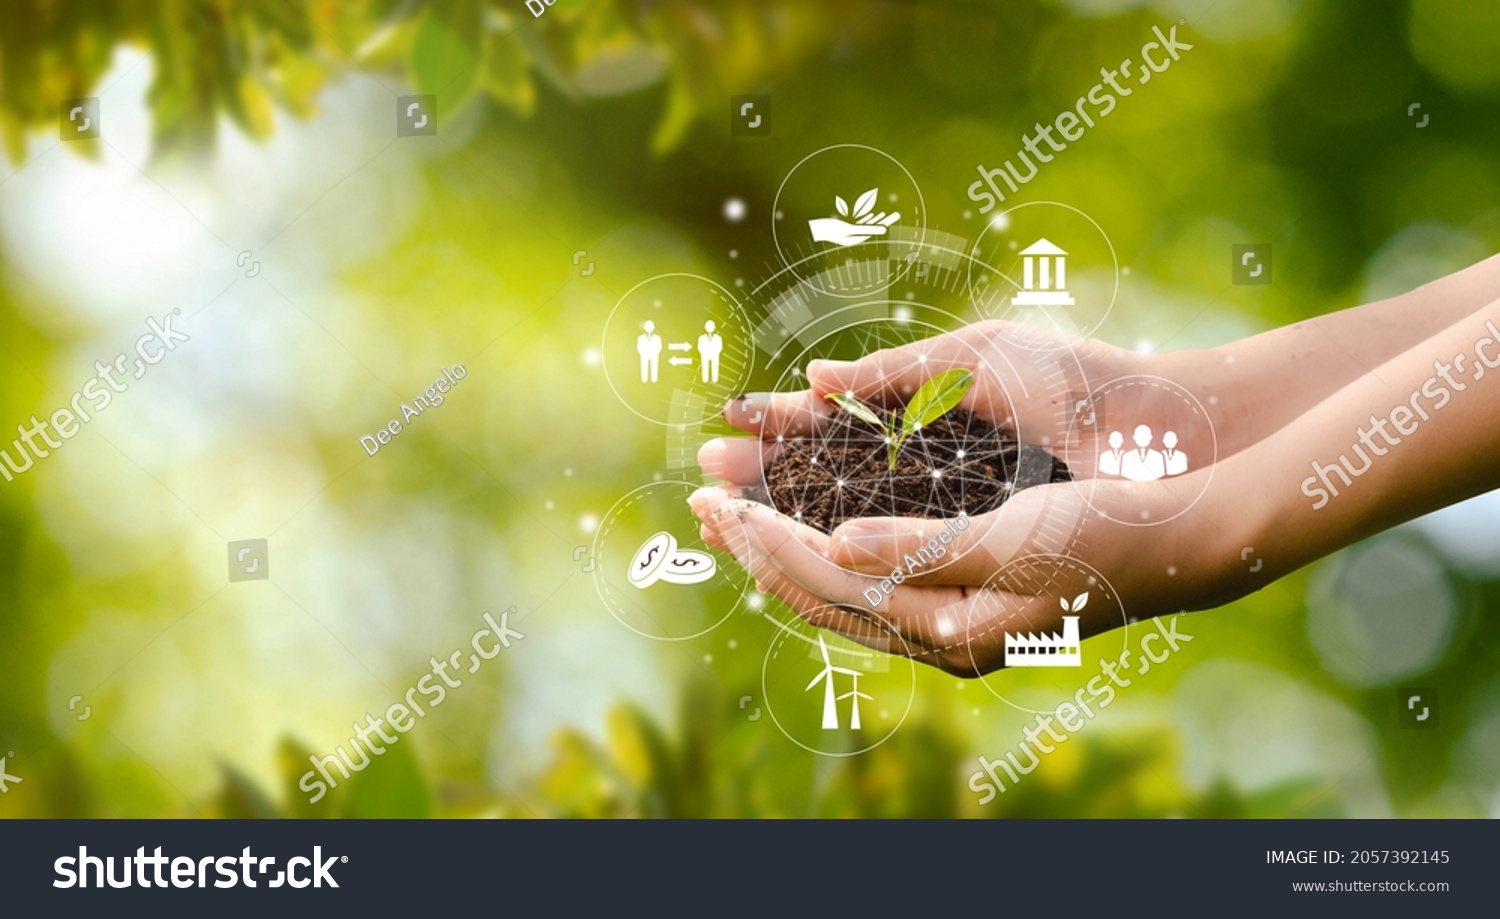 Hand planting trees with technology of renewable resources to reduce pollution ESG icon concept in hand for environmental, social and sustainable business governance. #2057392145